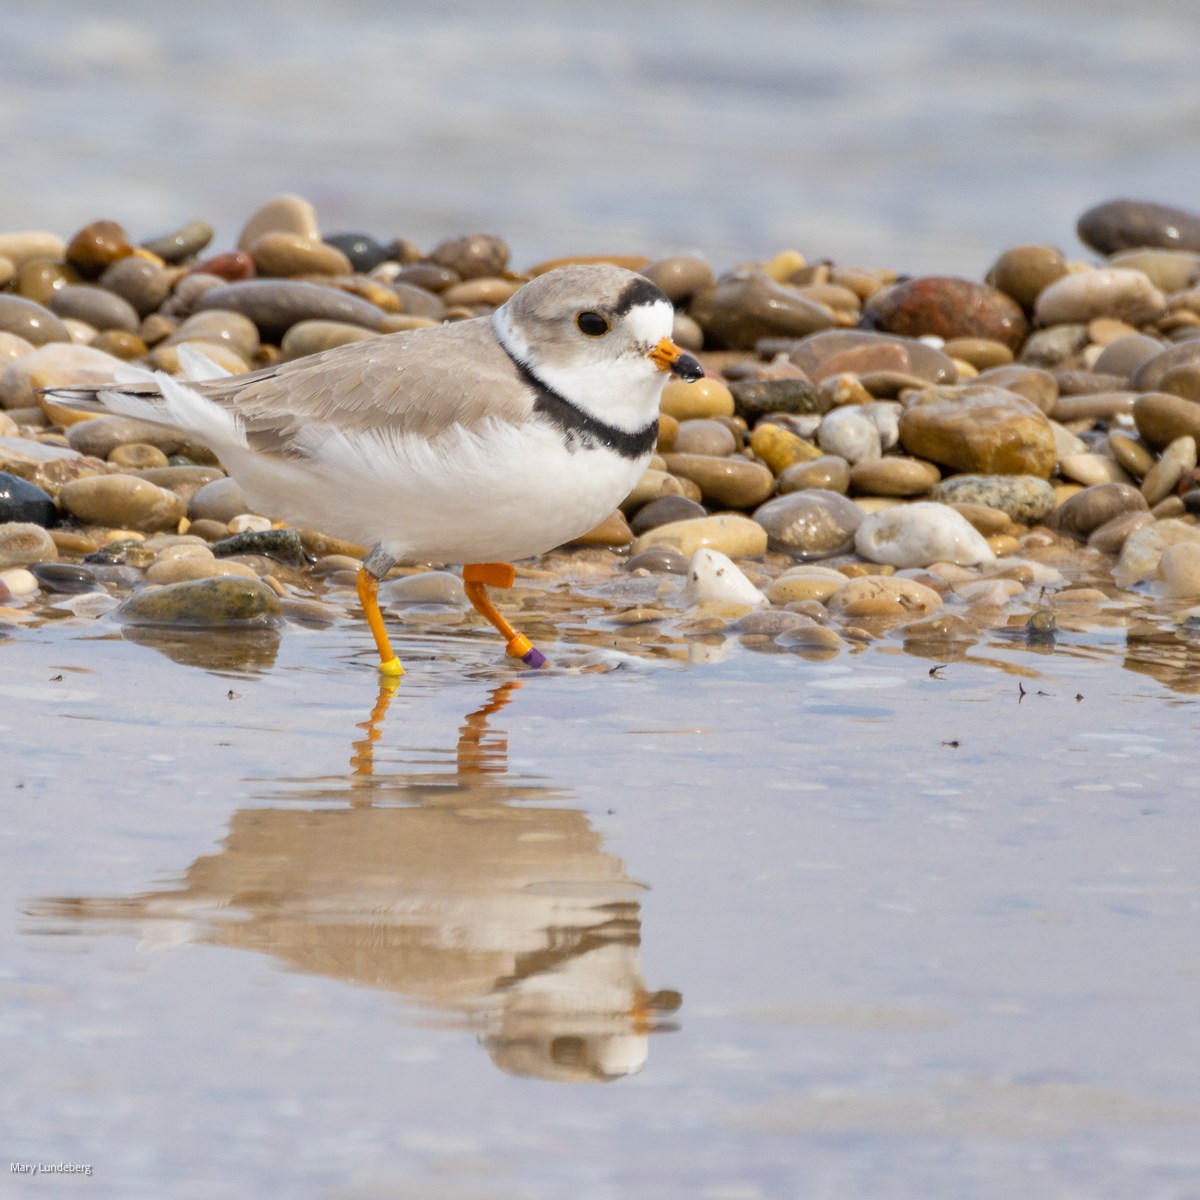 An adult piping plover stands in shallow water. It has a thick black band of feather across its forehead and around its neck.